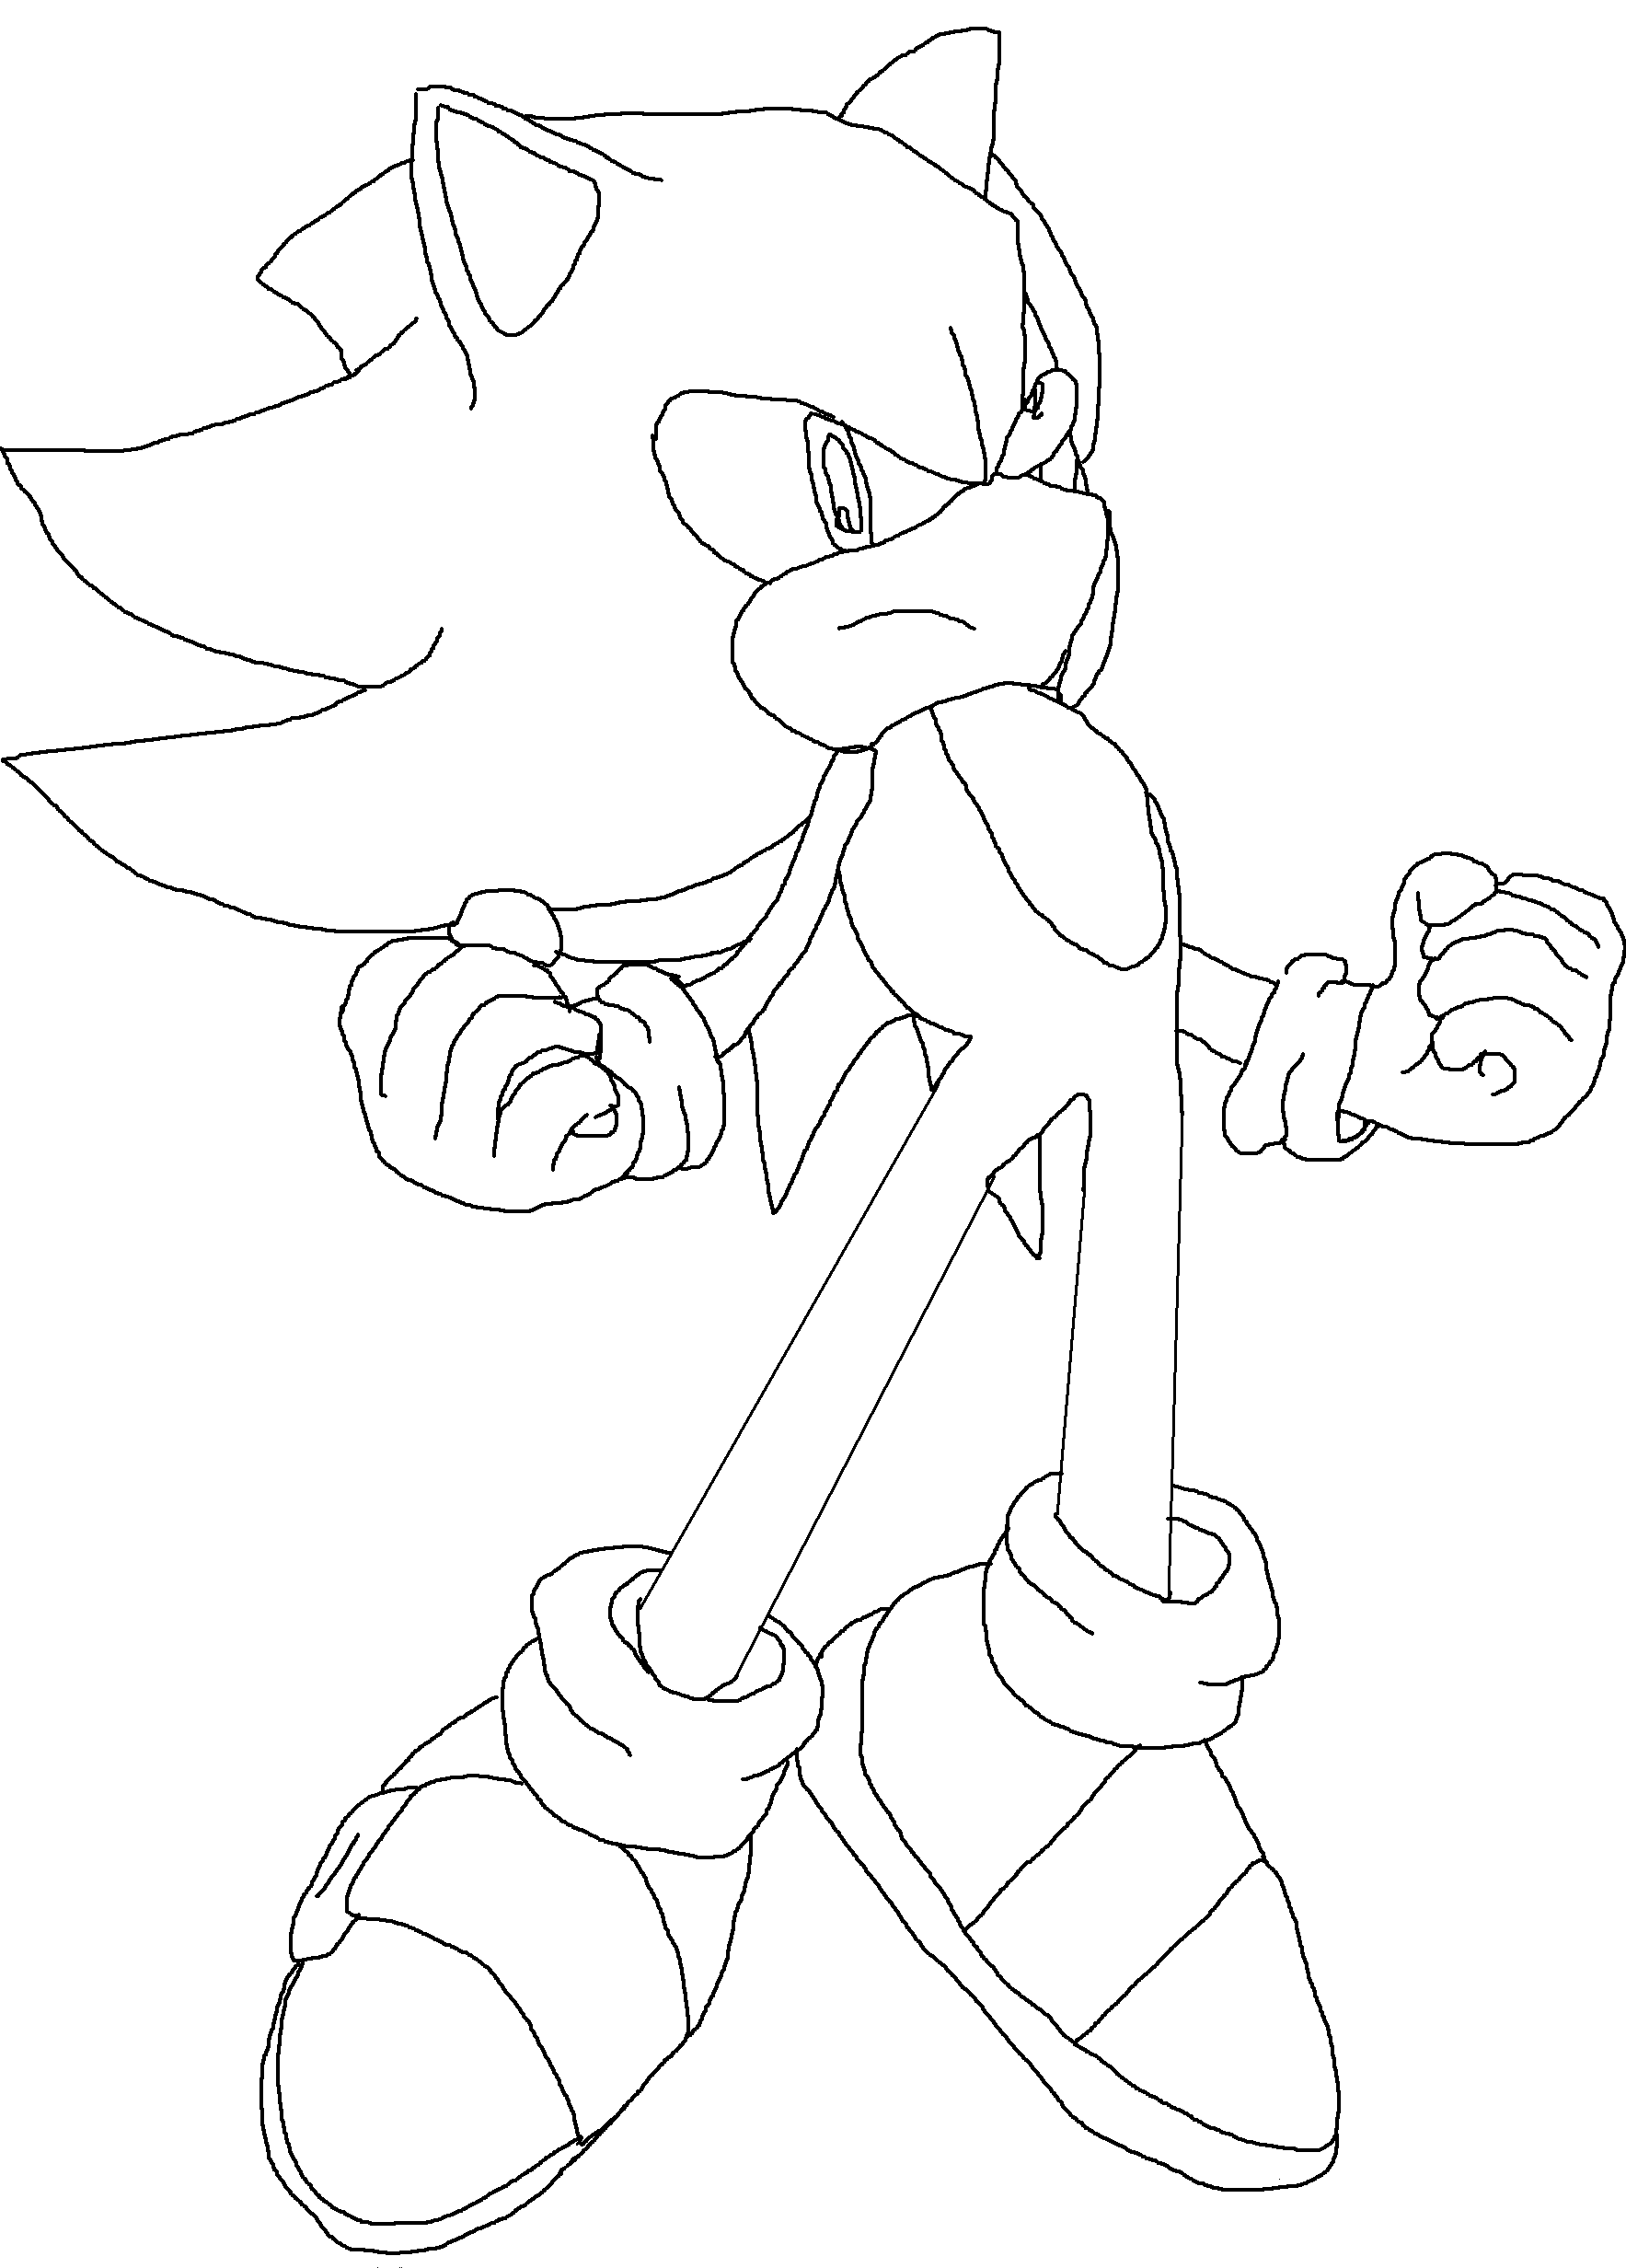  Sonic coloring pages | disney coloring pages for kids | color pages | coloring pages to print | kids coloring pages | #100